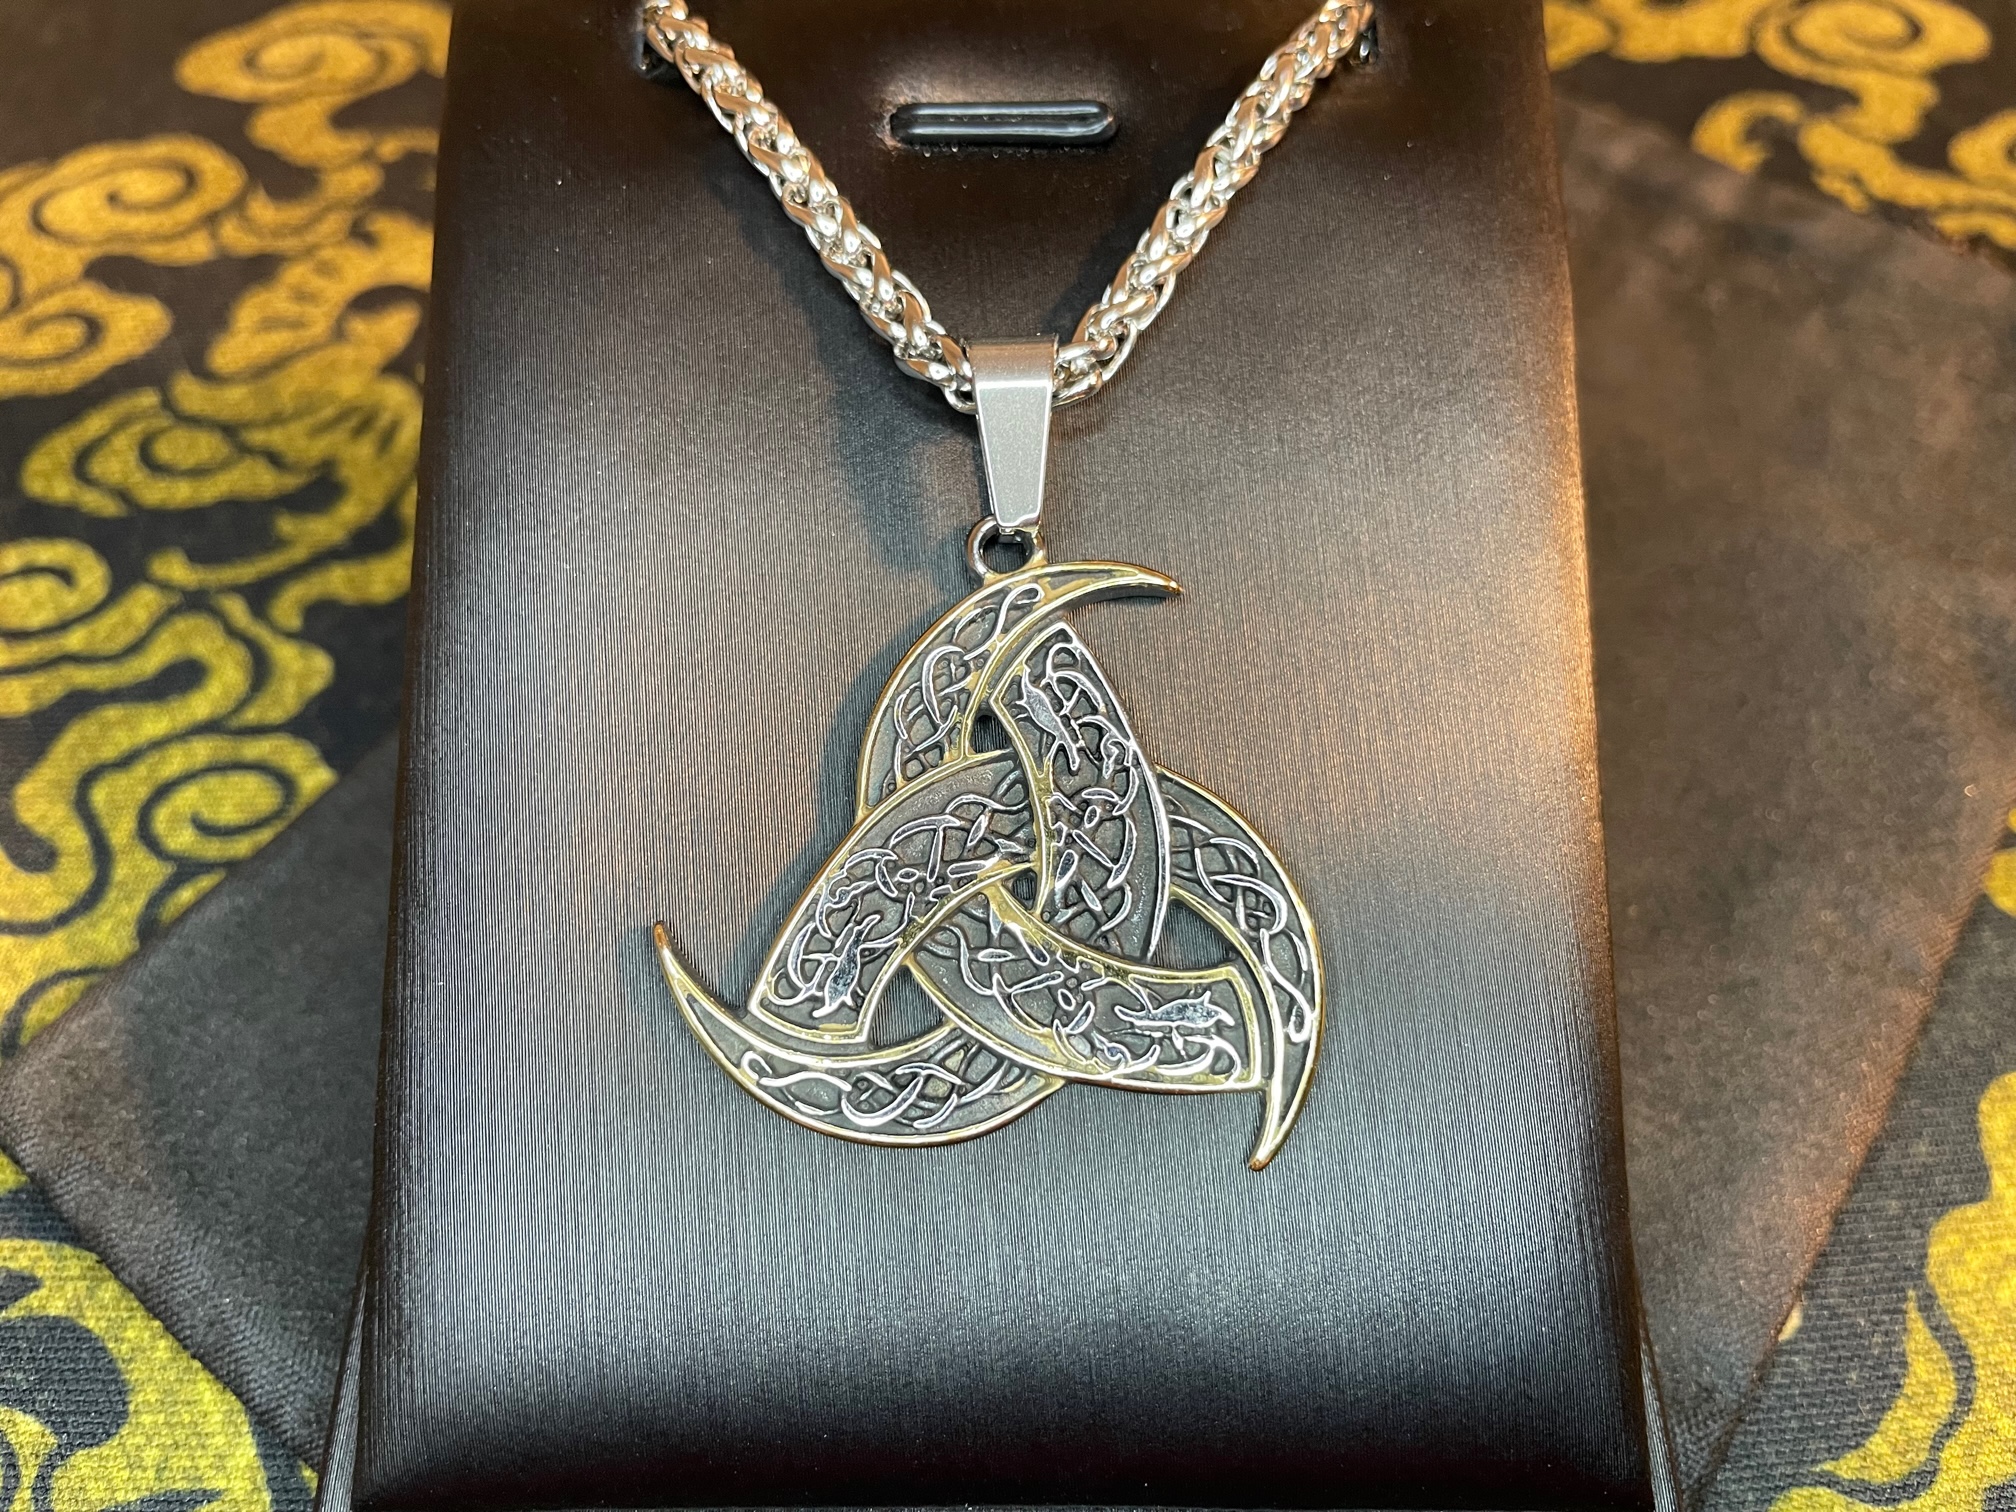 Check out the latest addition to my #etsy shop: Celtic Trinity Knot Viking Nordic Norse Steel Pendant Necklace Amulet Talisman Satanic Wiccan Pagan Occult Jewelry – #celtic #trinityknot #celticknot #occultjewelry #satanicjewelry #darknessjewelry